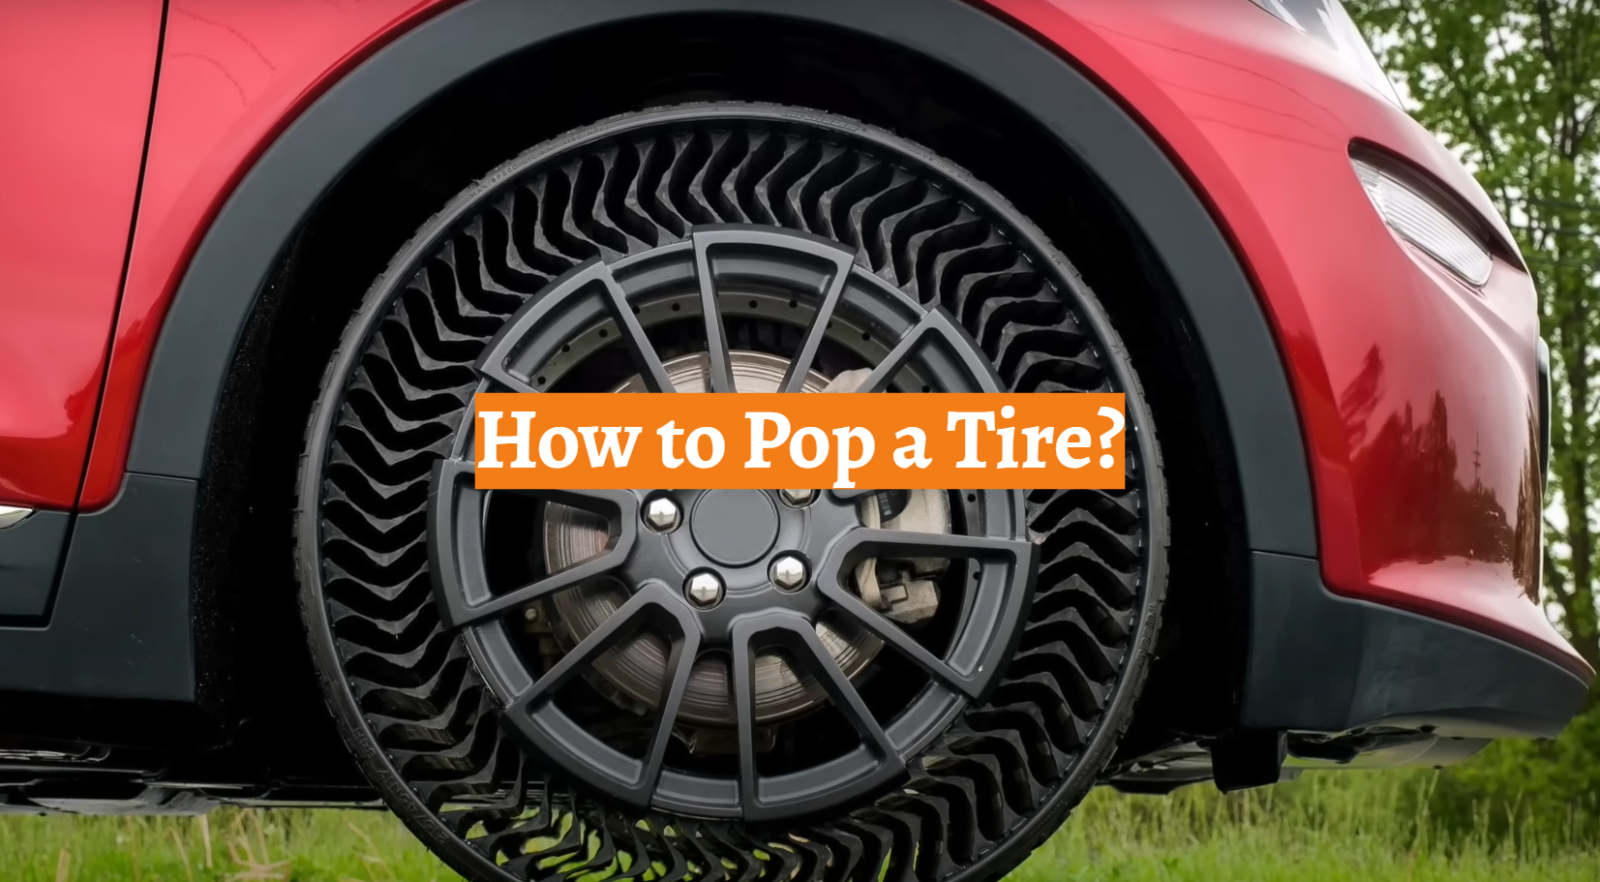 How to Pop a Tire?